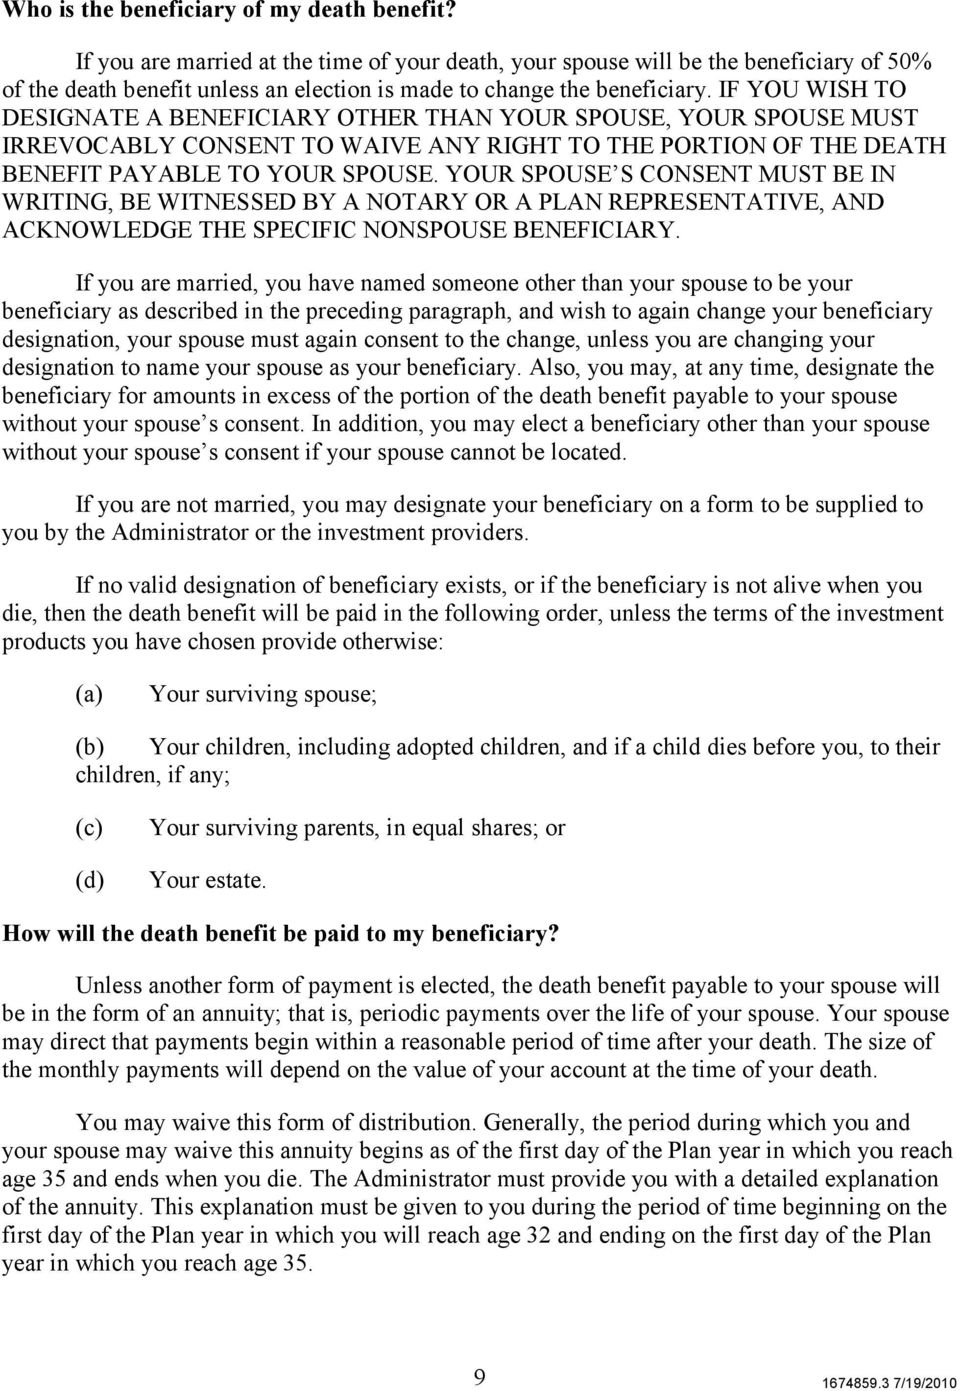 IF YOU WISH TO DESIGNATE A BENEFICIARY OTHER THAN YOUR SPOUSE, YOUR SPOUSE MUST IRREVOCABLY CONSENT TO WAIVE ANY RIGHT TO THE PORTION OF THE DEATH BENEFIT PAYABLE TO YOUR SPOUSE.